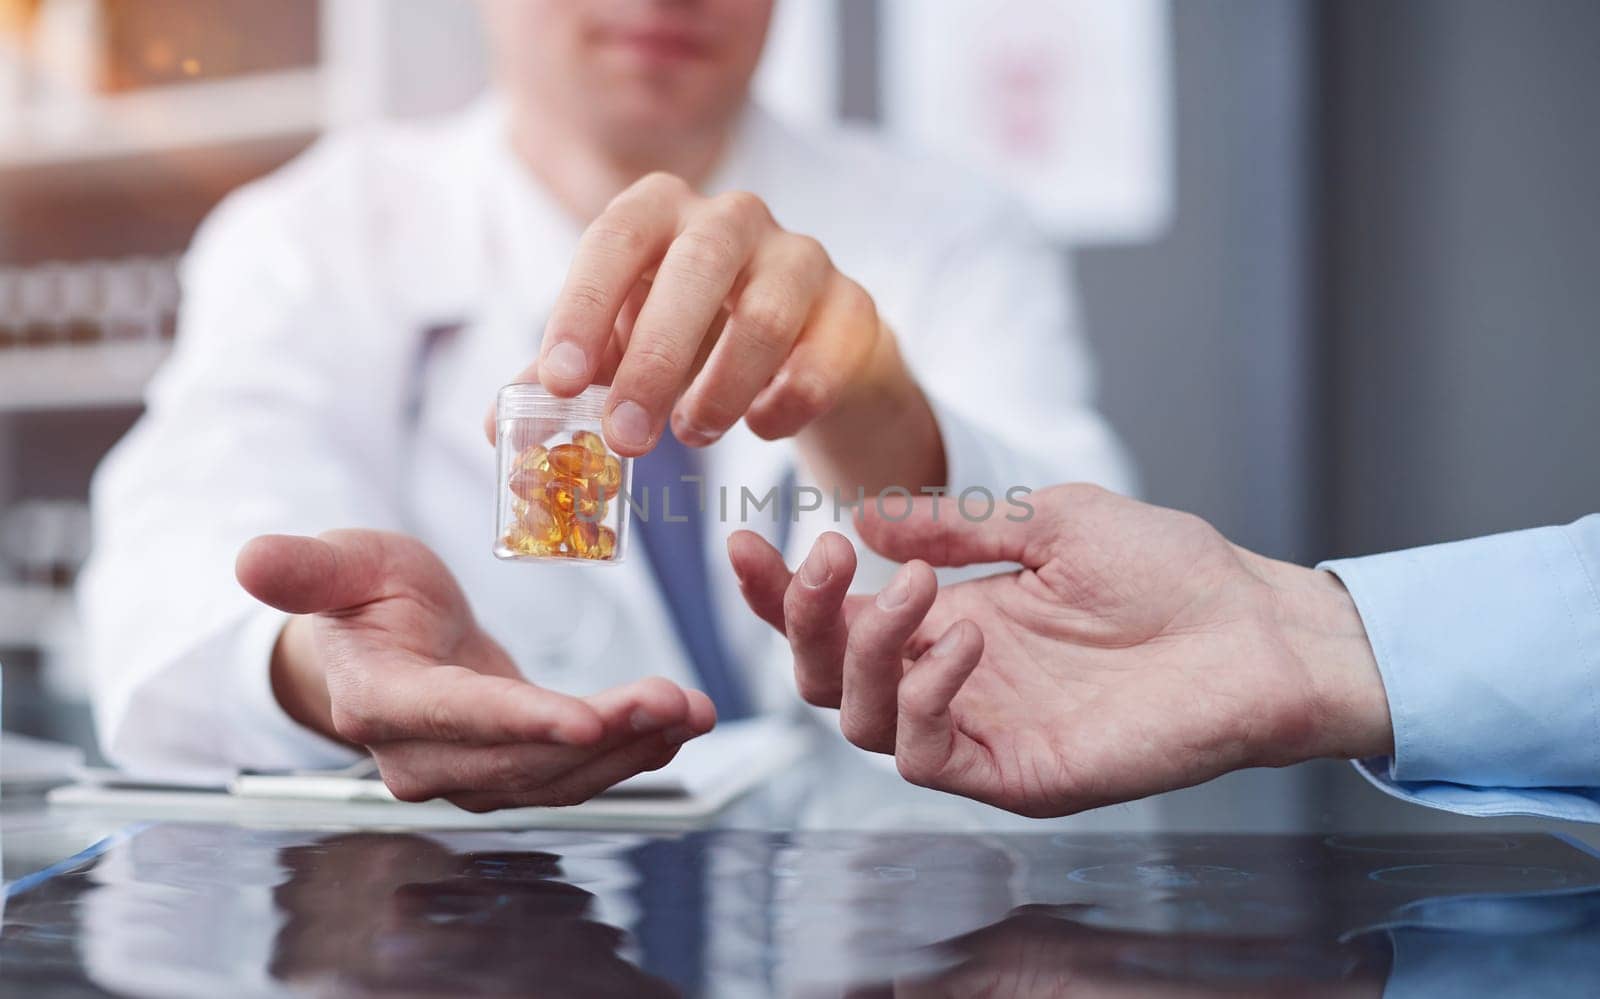 Pharmacist showing up a yellow pills in bottle by Prosto